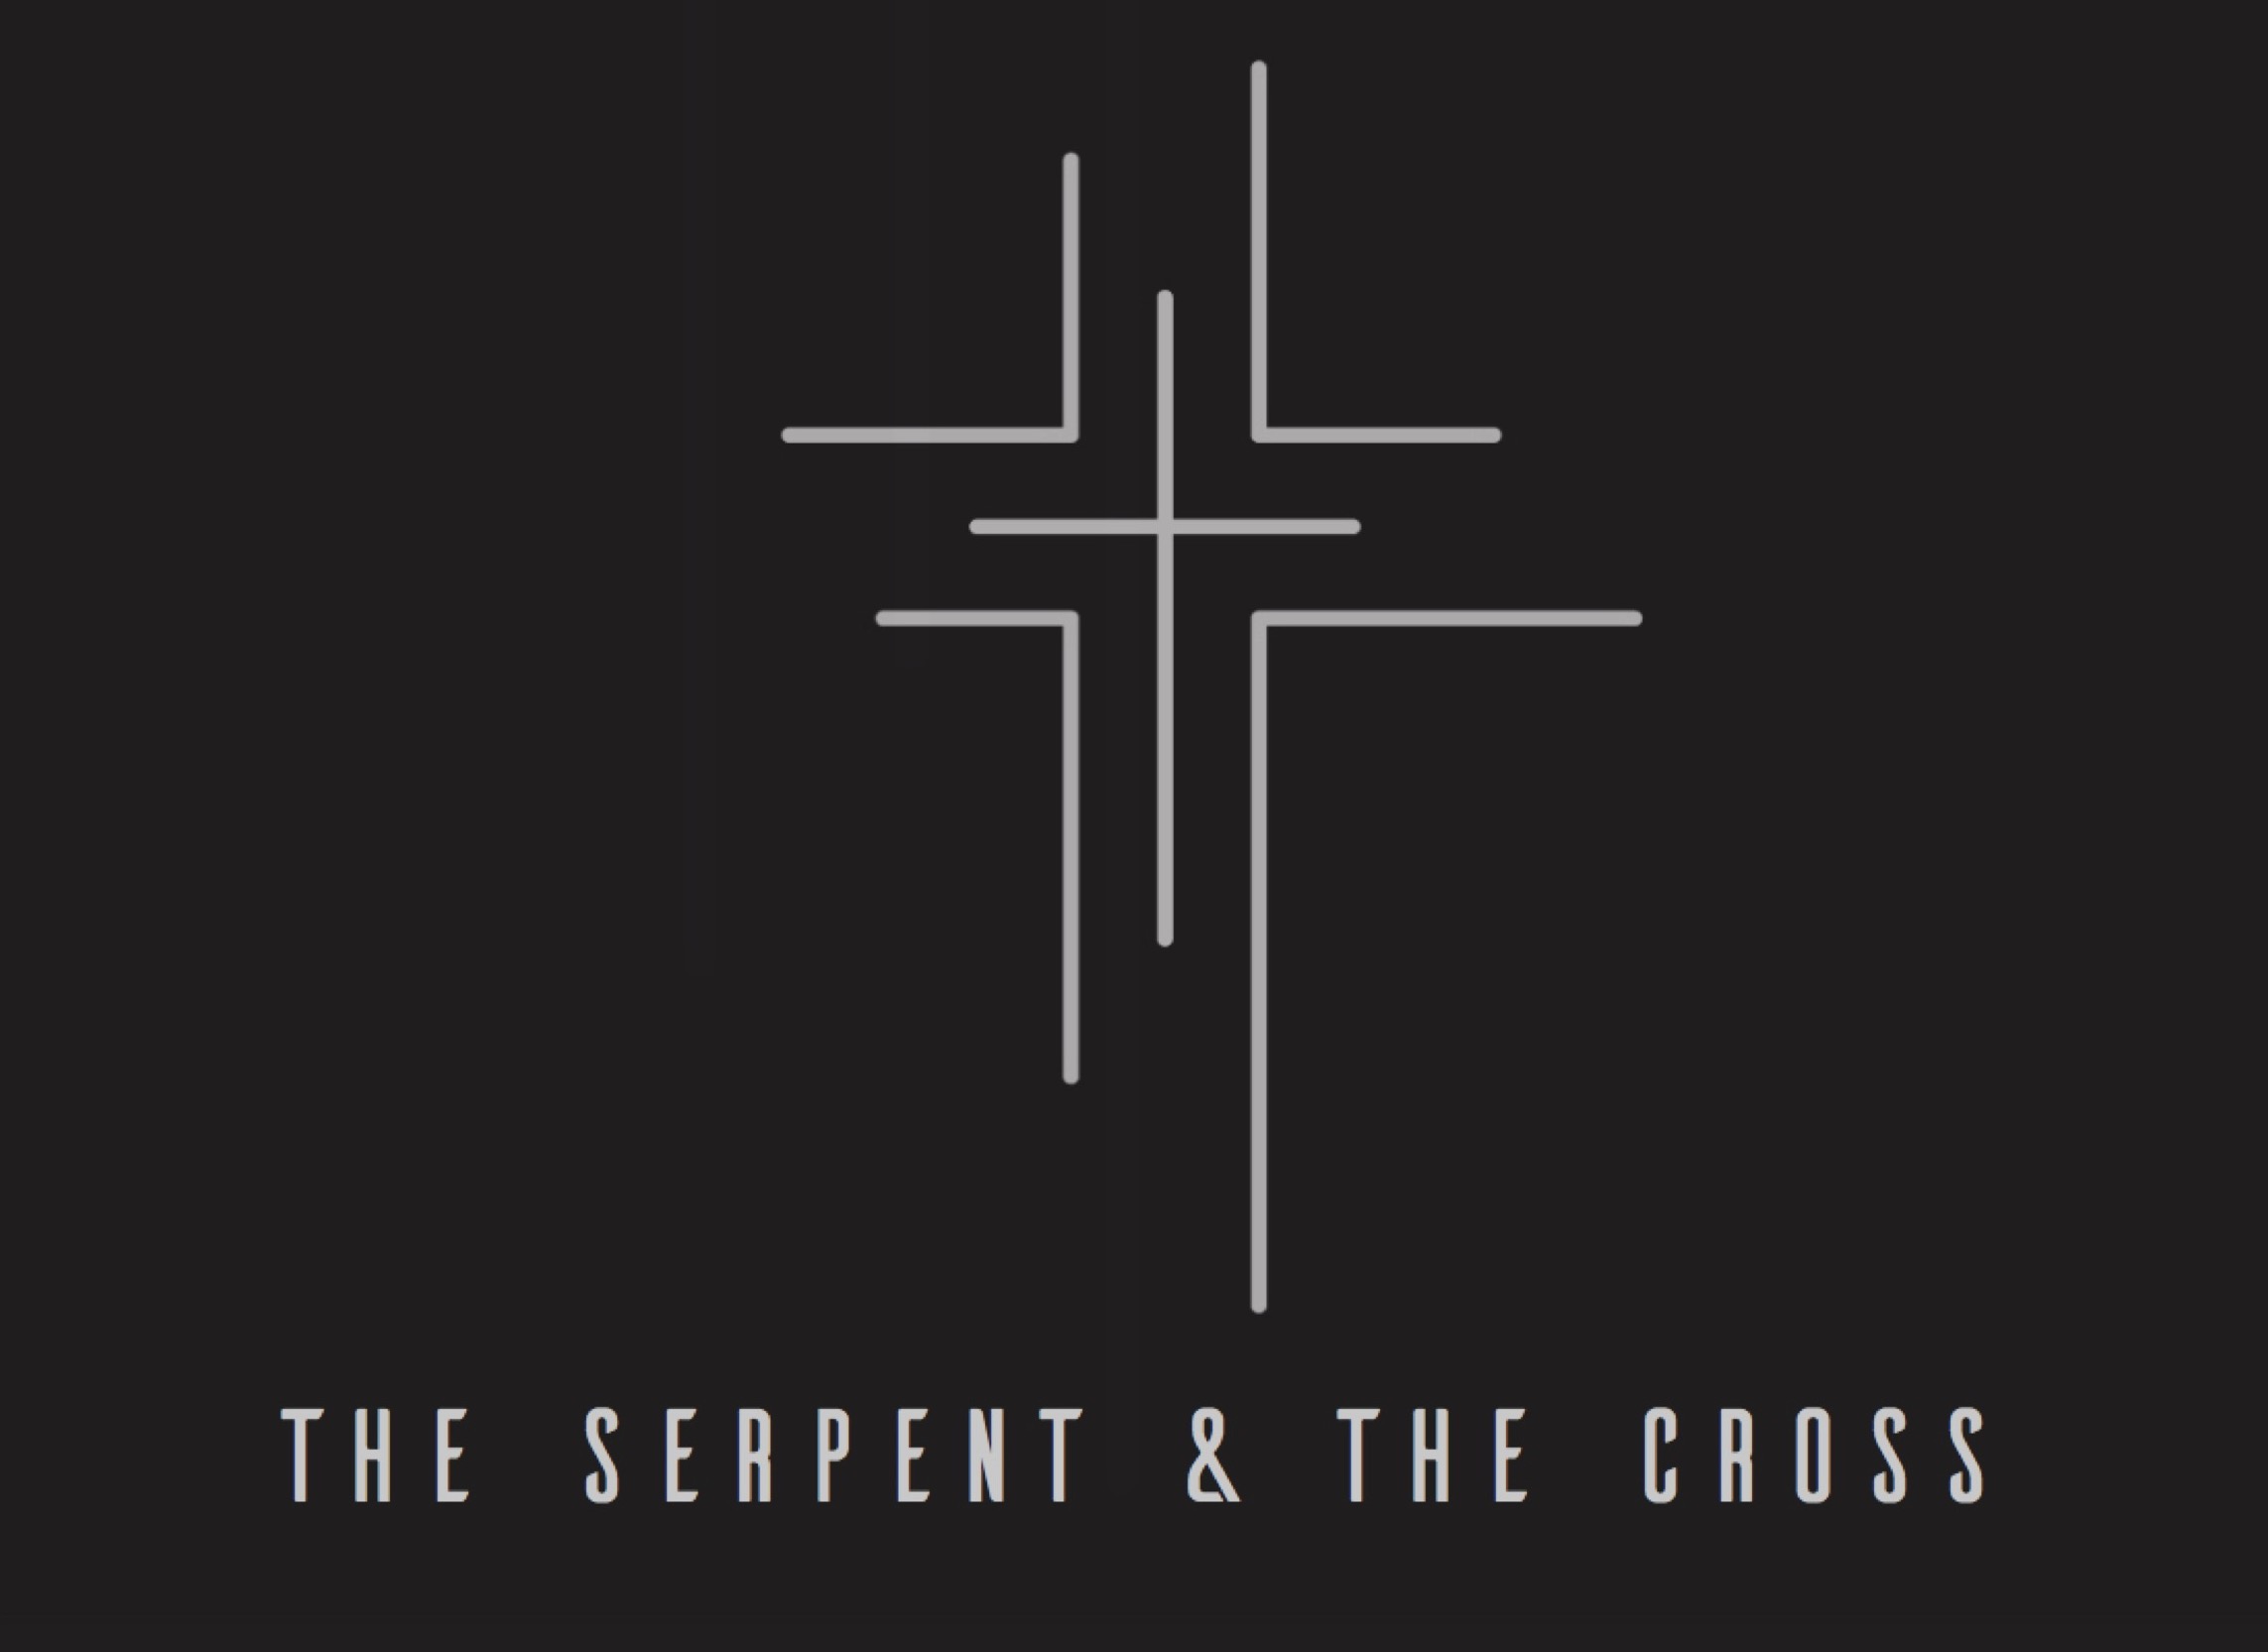 Ryan Post - "The Serpent and the Cross"